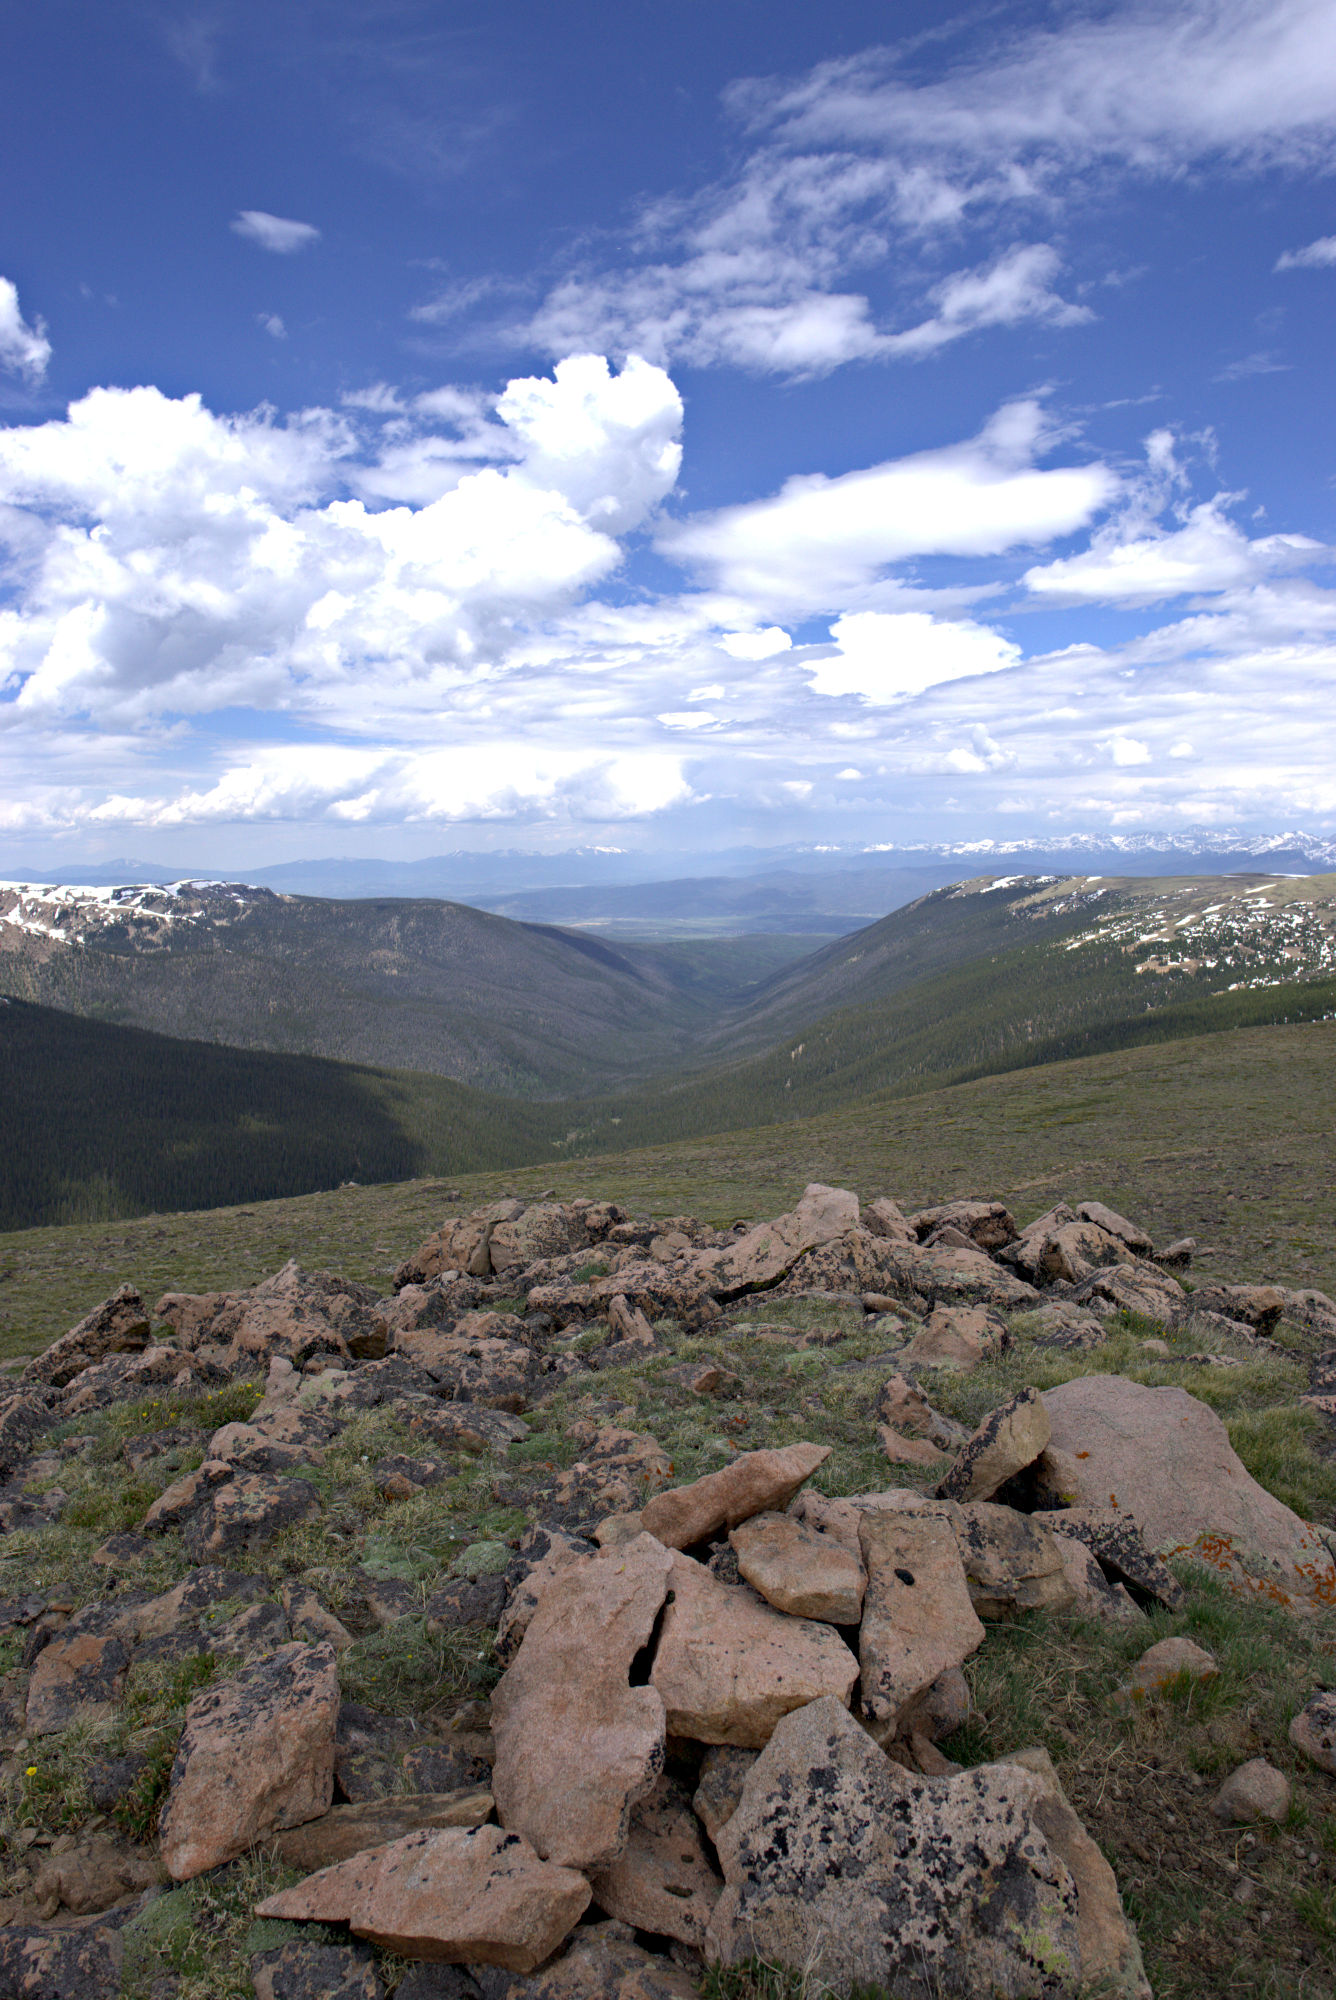 Grasslands and valleys, viewed from the top of a mountain. The sky is blue and cloud cover is minimal.